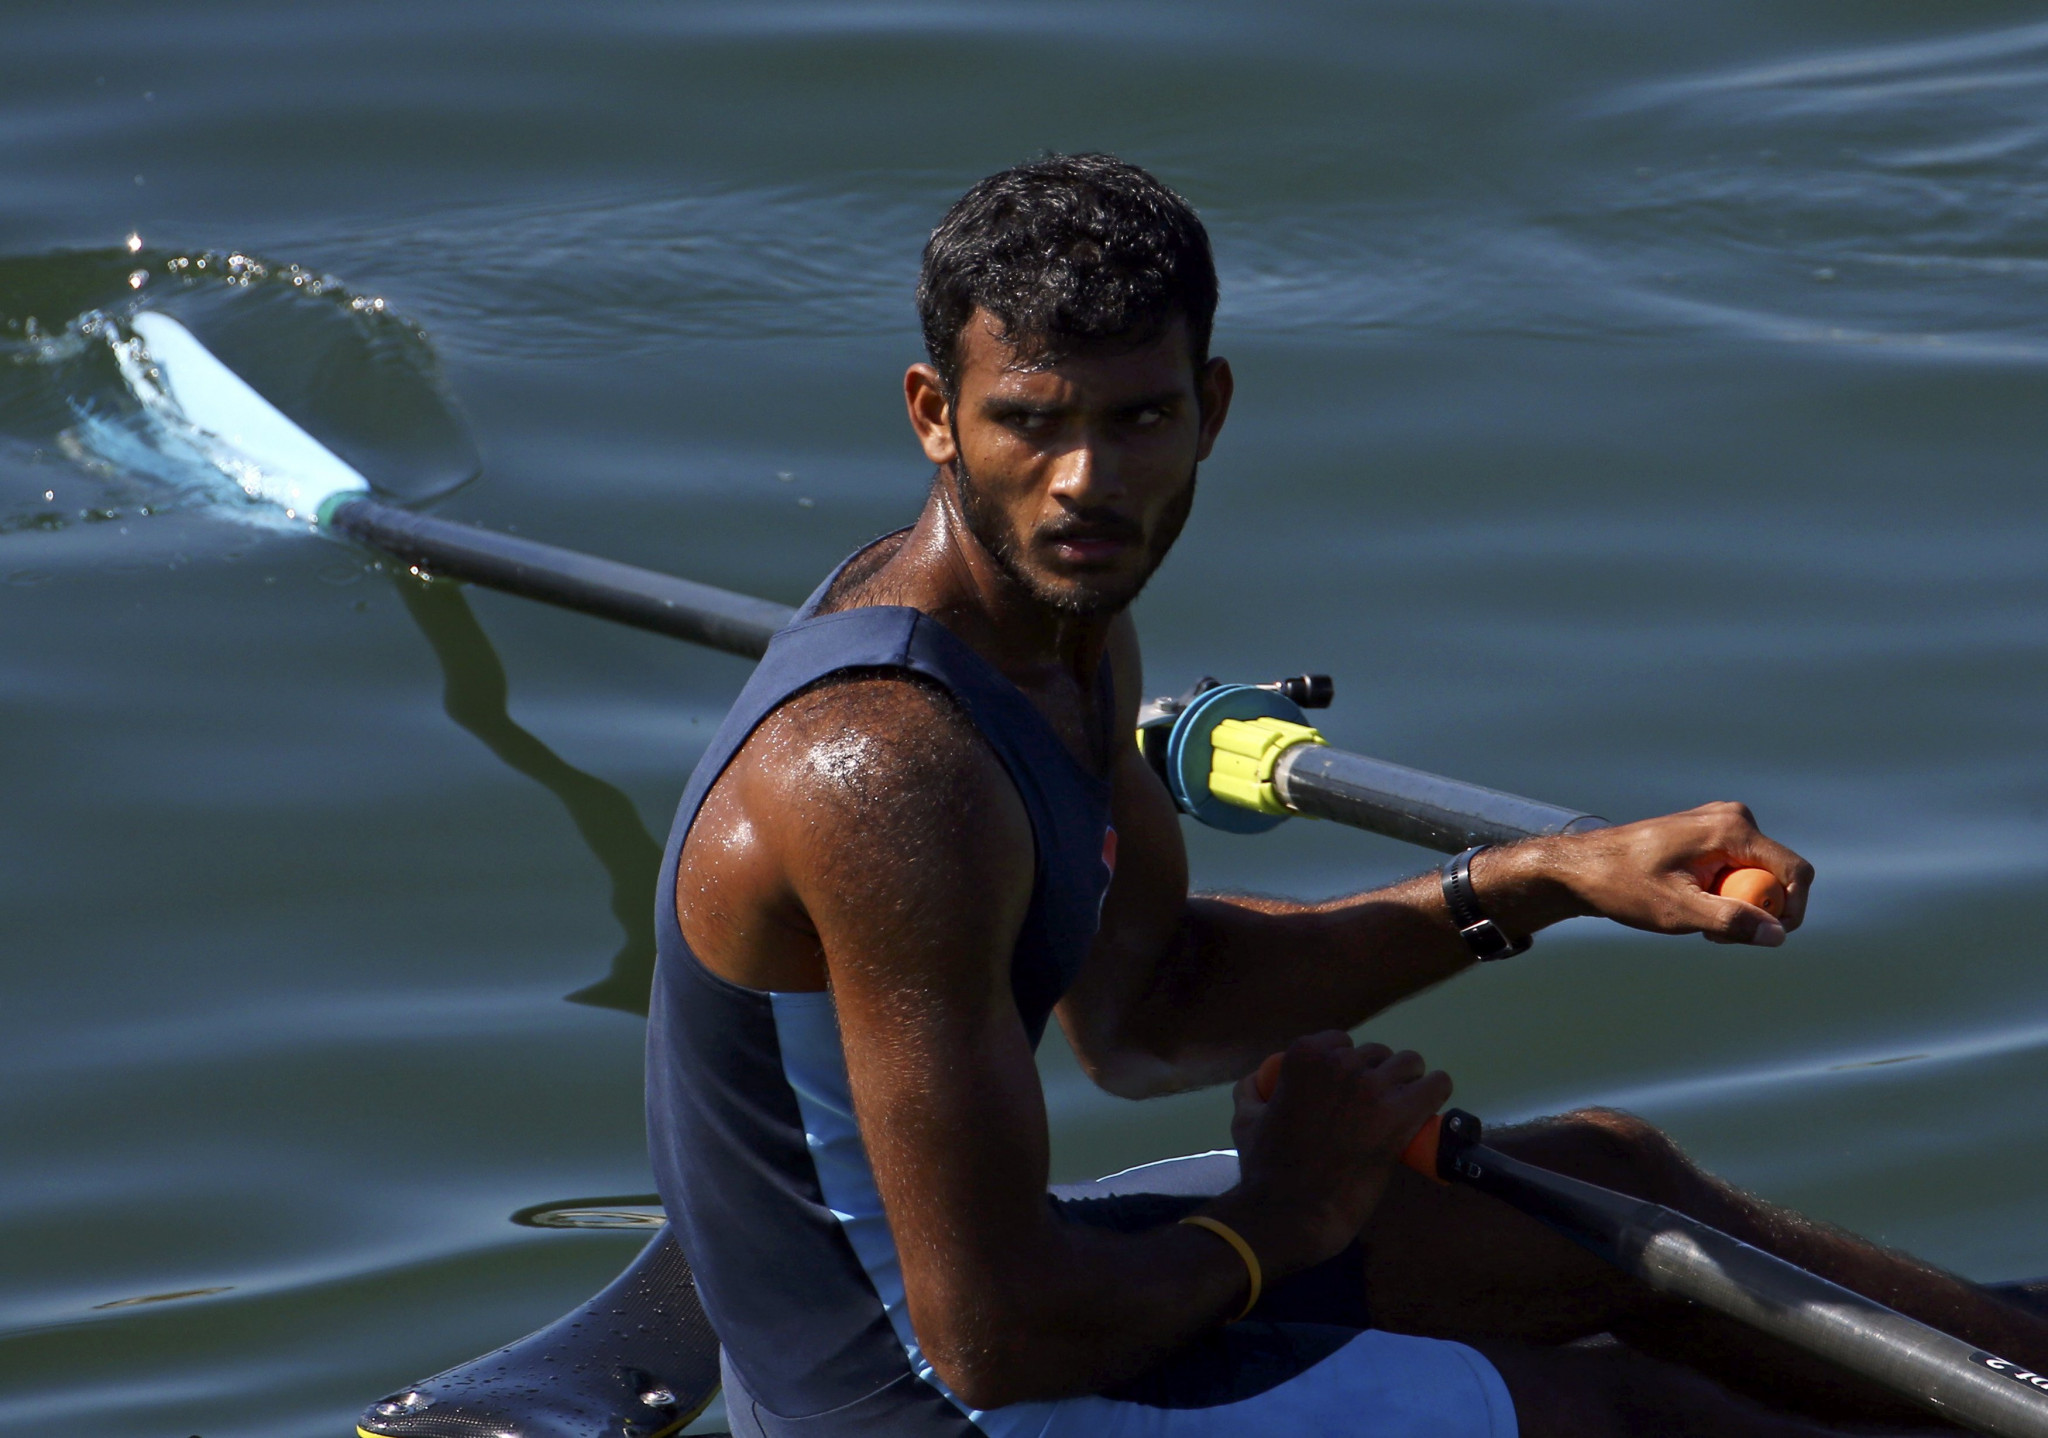 The lifting of Dattu Baban Bhokanal's ban paves the way for him to compete at the FISA Asia and Oceania Olympic Qualification Regatta in April ©Getty Images